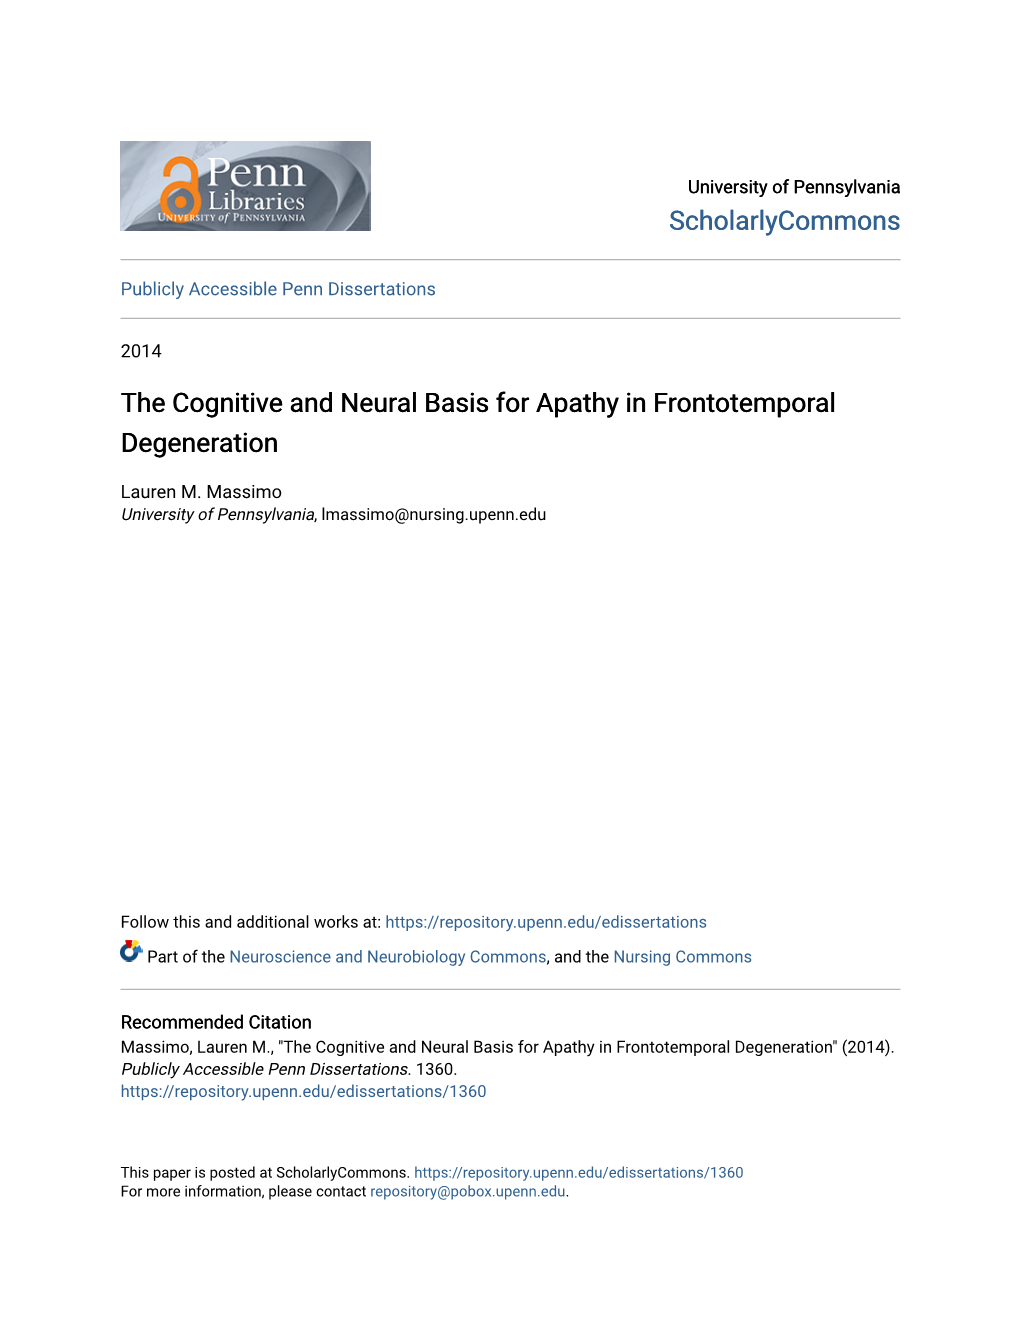 The Cognitive and Neural Basis for Apathy in Frontotemporal Degeneration